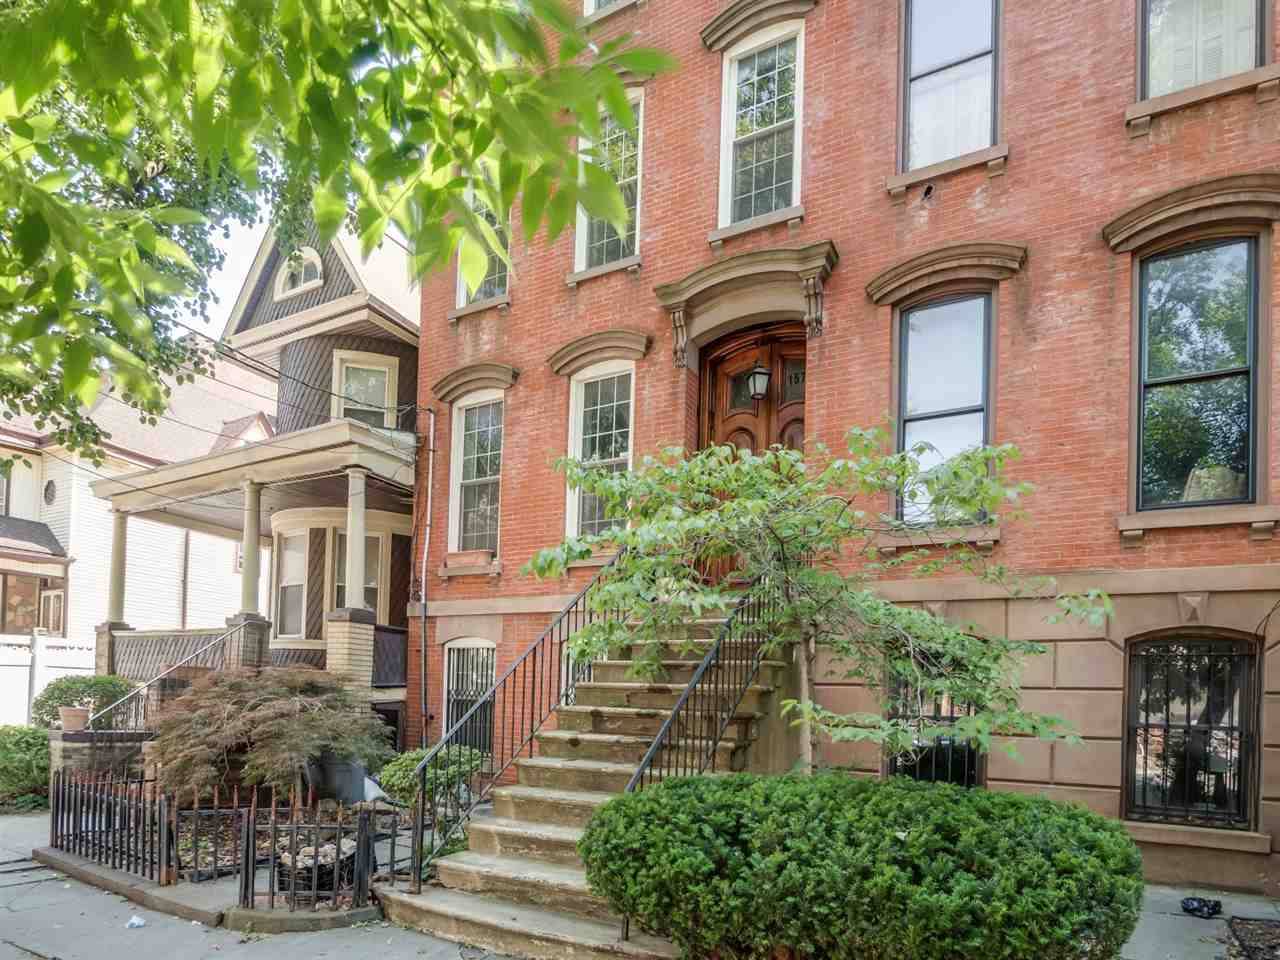 Take a look at this breathtaking brownstone duplex offering two large bedrooms and one bath at eye-level with the treetops